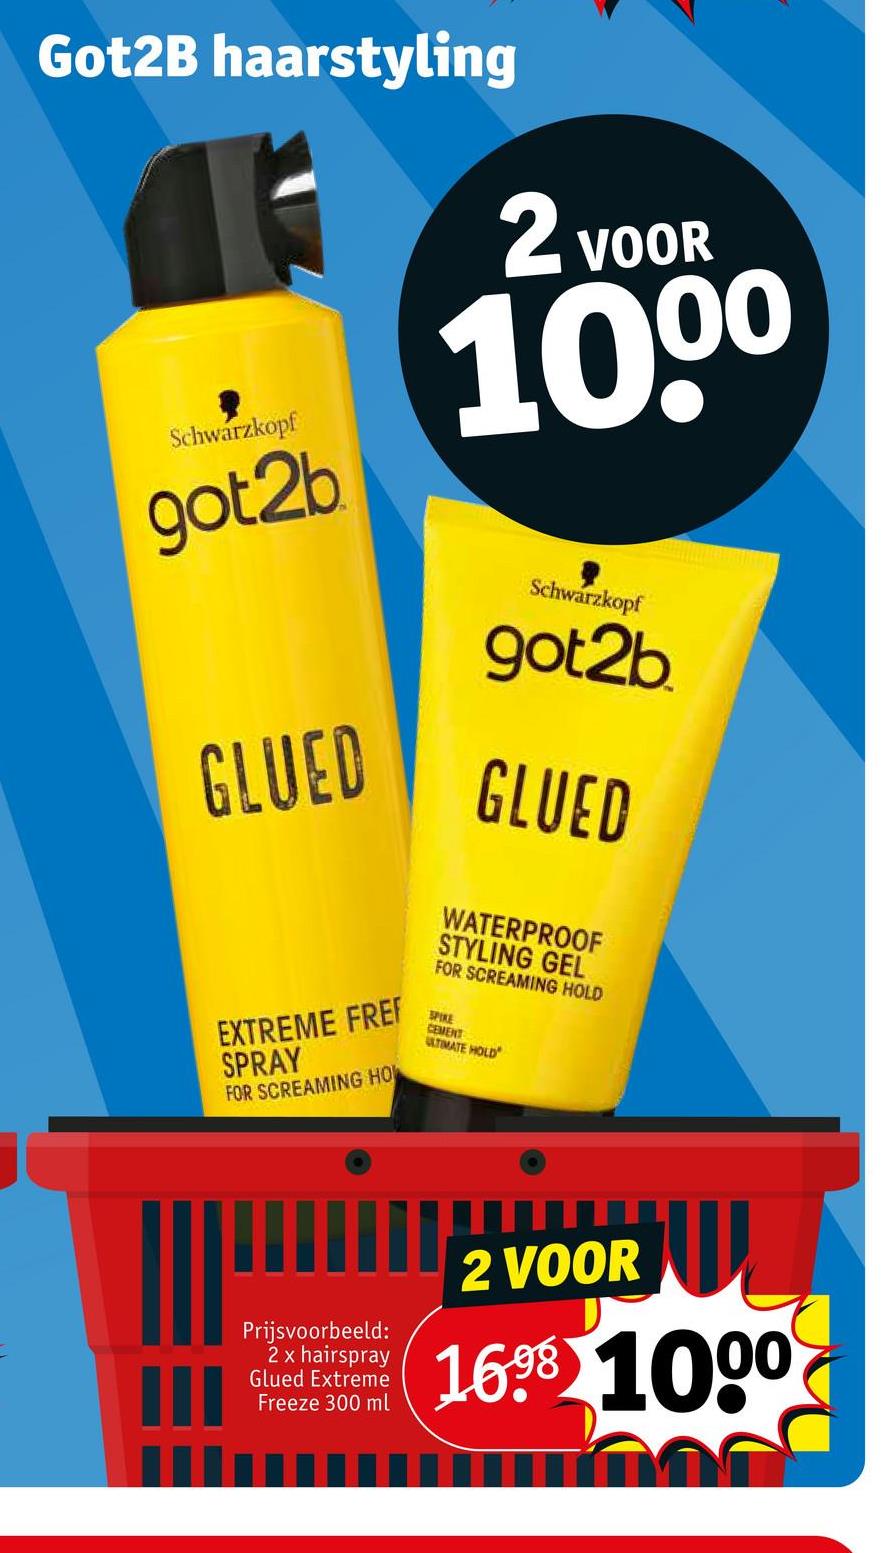 Got2B haarstyling
Schwarzkopf
got2b
GLUED
EXTREME FREF
SPRAY
FOR SCREAMING HOW
M
Prijsvoorbeeld:
2 x hairspray
Glued Extreme
Freeze 300 ml
2 VOOR
100⁰
Schwarzkopf
got2b
GLUED
WATERPROOF
STYLING GEL
FOR SCREAMING HOLD
SPIKE
CEMENT
ULTIMATE HOLD
V
2 VOOR
16⁹8 1000